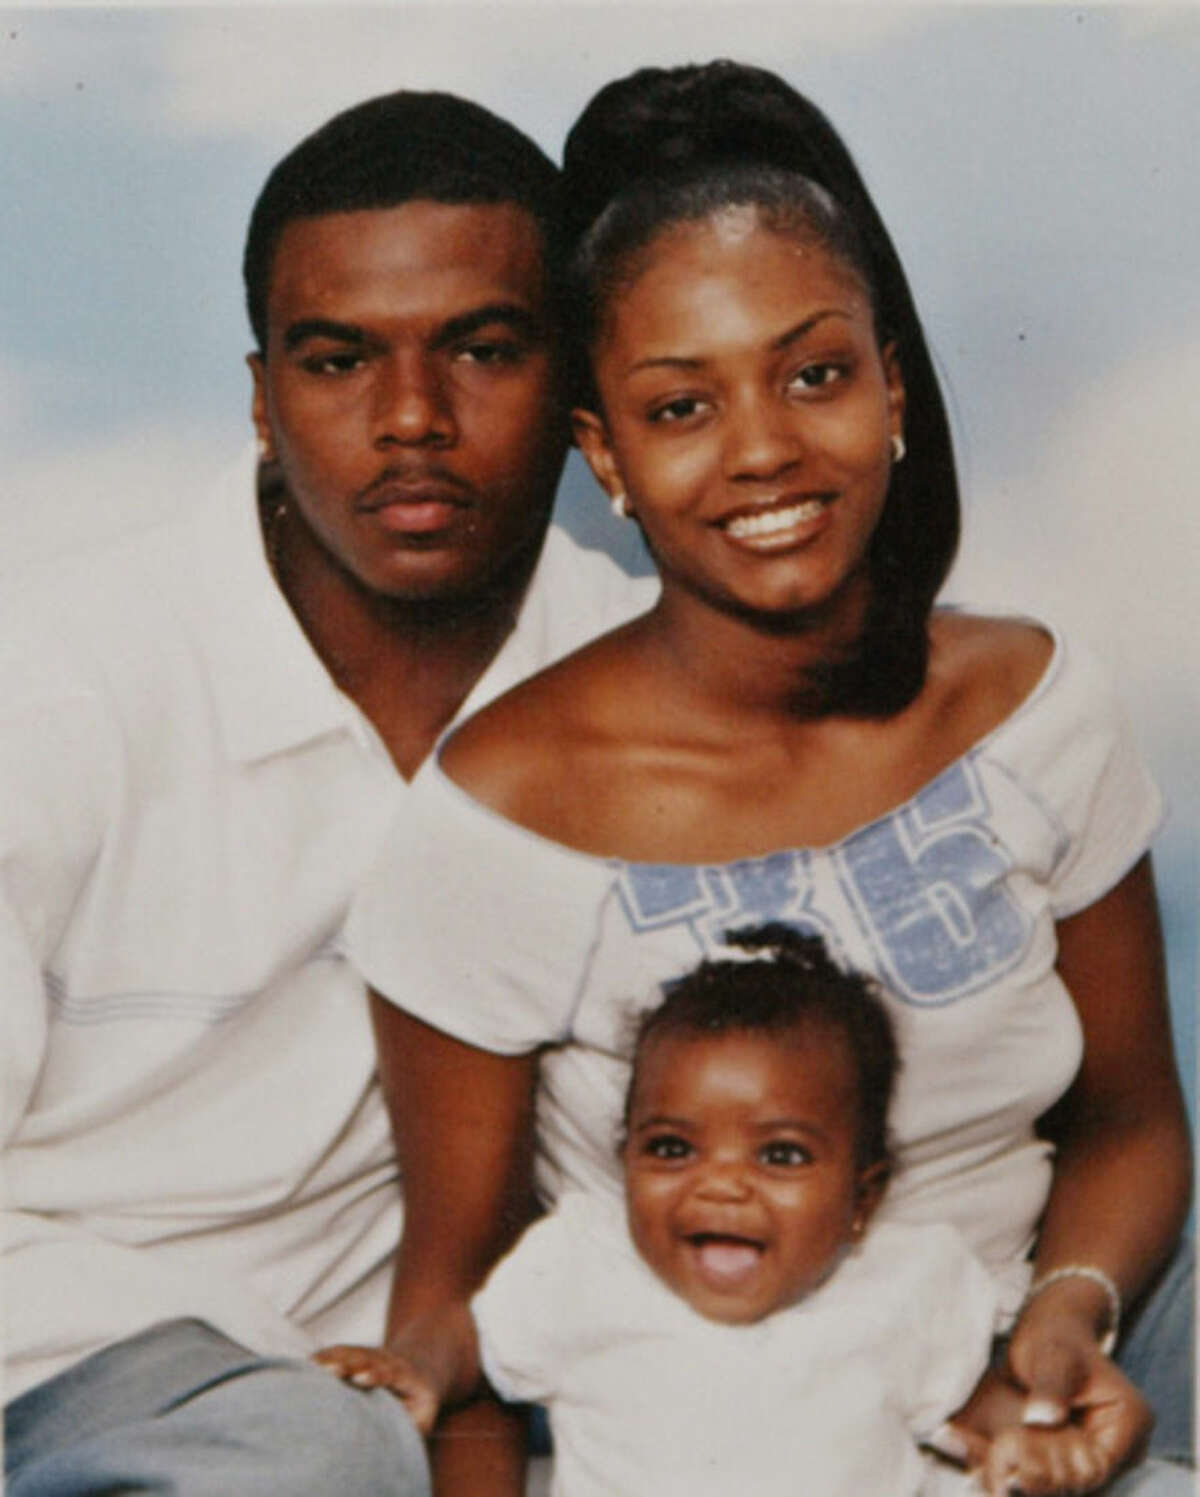 FILE - In this undated family file photo, Sean Bell and his fiancee Nicole Paultre pose with their daughter. Bell died in a hail of police gunfire on Nov. 25, 2006, as he left his bachelor party in the Queens borough of New York. Three detectives were acquitted of all charges in the shooting of Bell, who was unarmed. At least 400 people are killed by police officers in the United States every year, and while the circumstances of each case are different, one thing remains constant: In only a handful of instances do grand juries issue an indictment, concluding that the officer has committed a crime. (AP Photo/Family Photo via The Daily News, File)